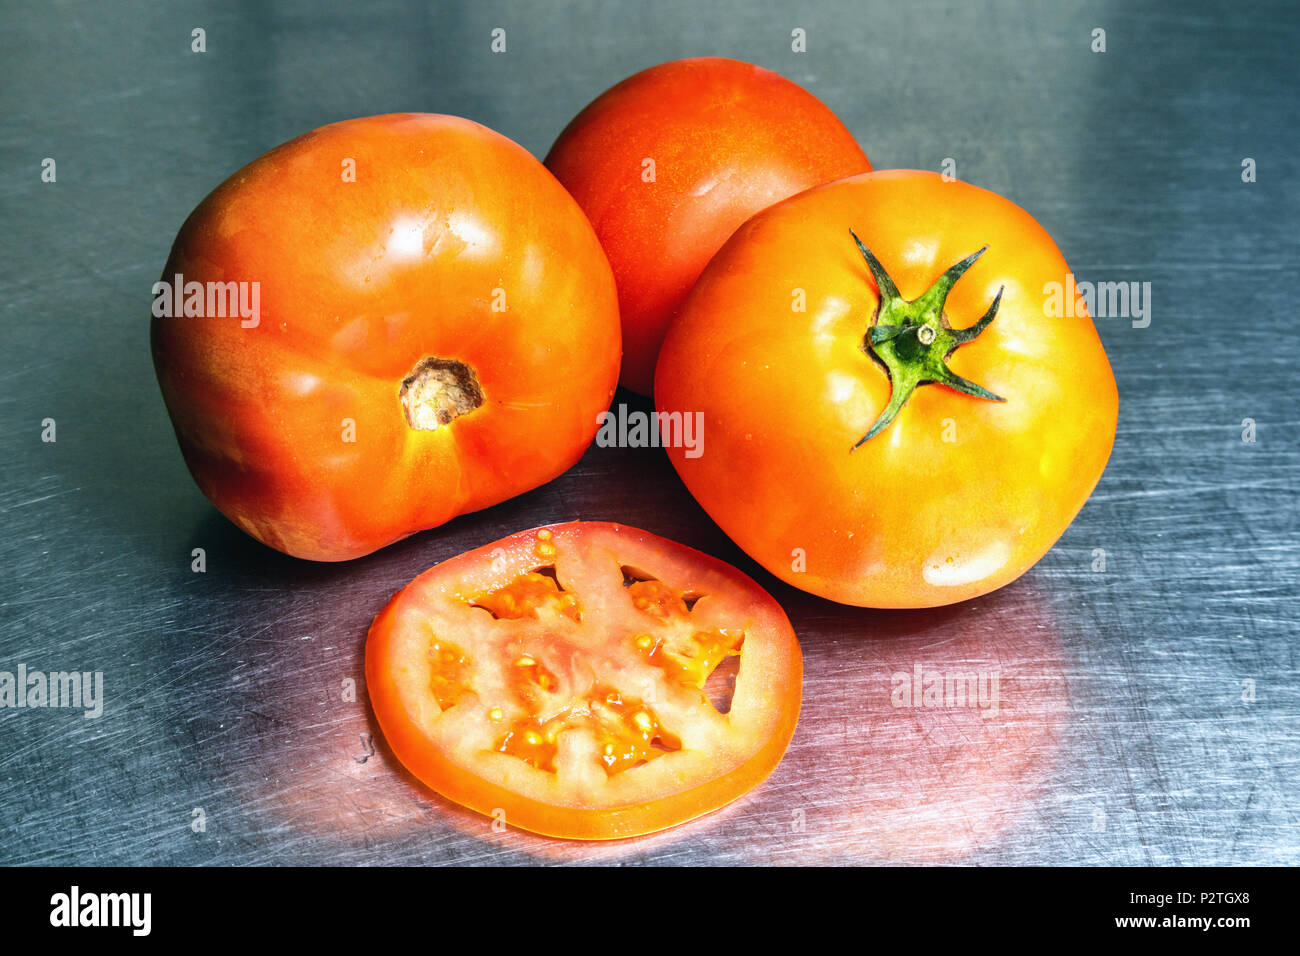 tomatoes and slice on stainless steel background Stock Photo